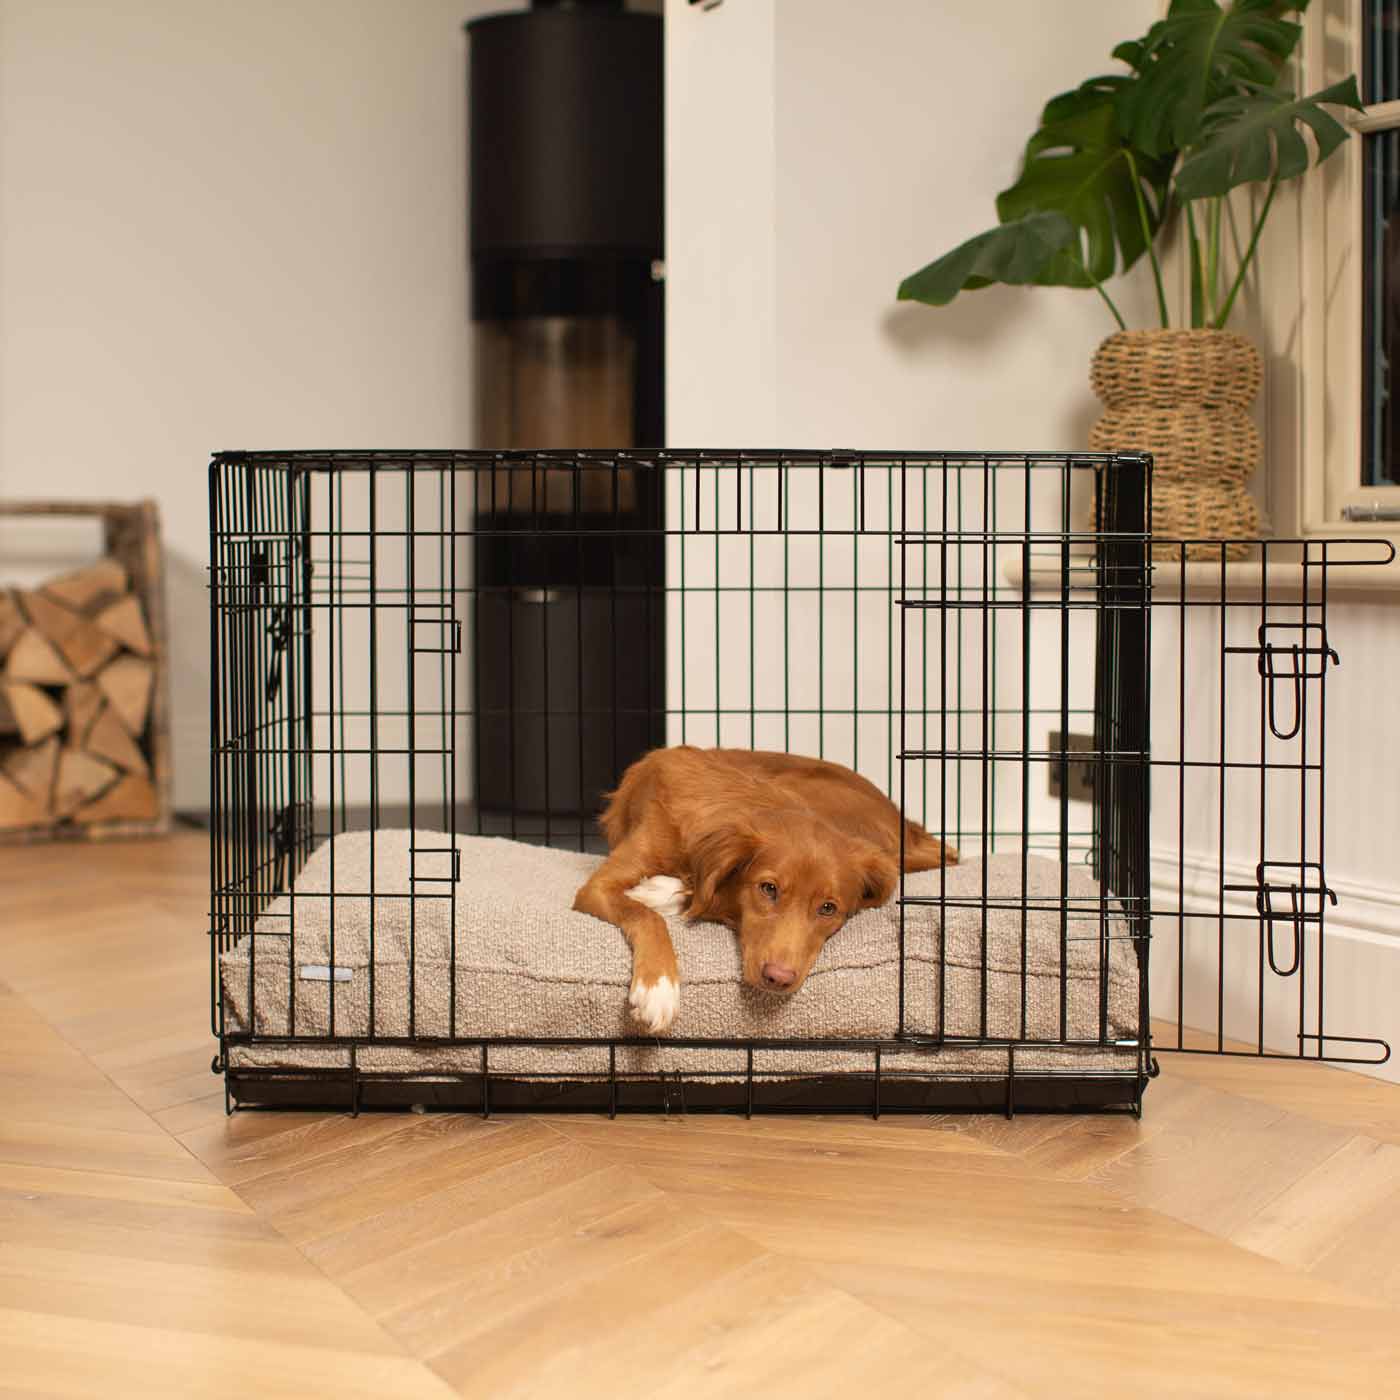 Luxury Dog Cage Cushion, Mink Bouclé Cage Cushion The Perfect Dog Cage Accessory, Available To Personalize Now at Lords & Labradors